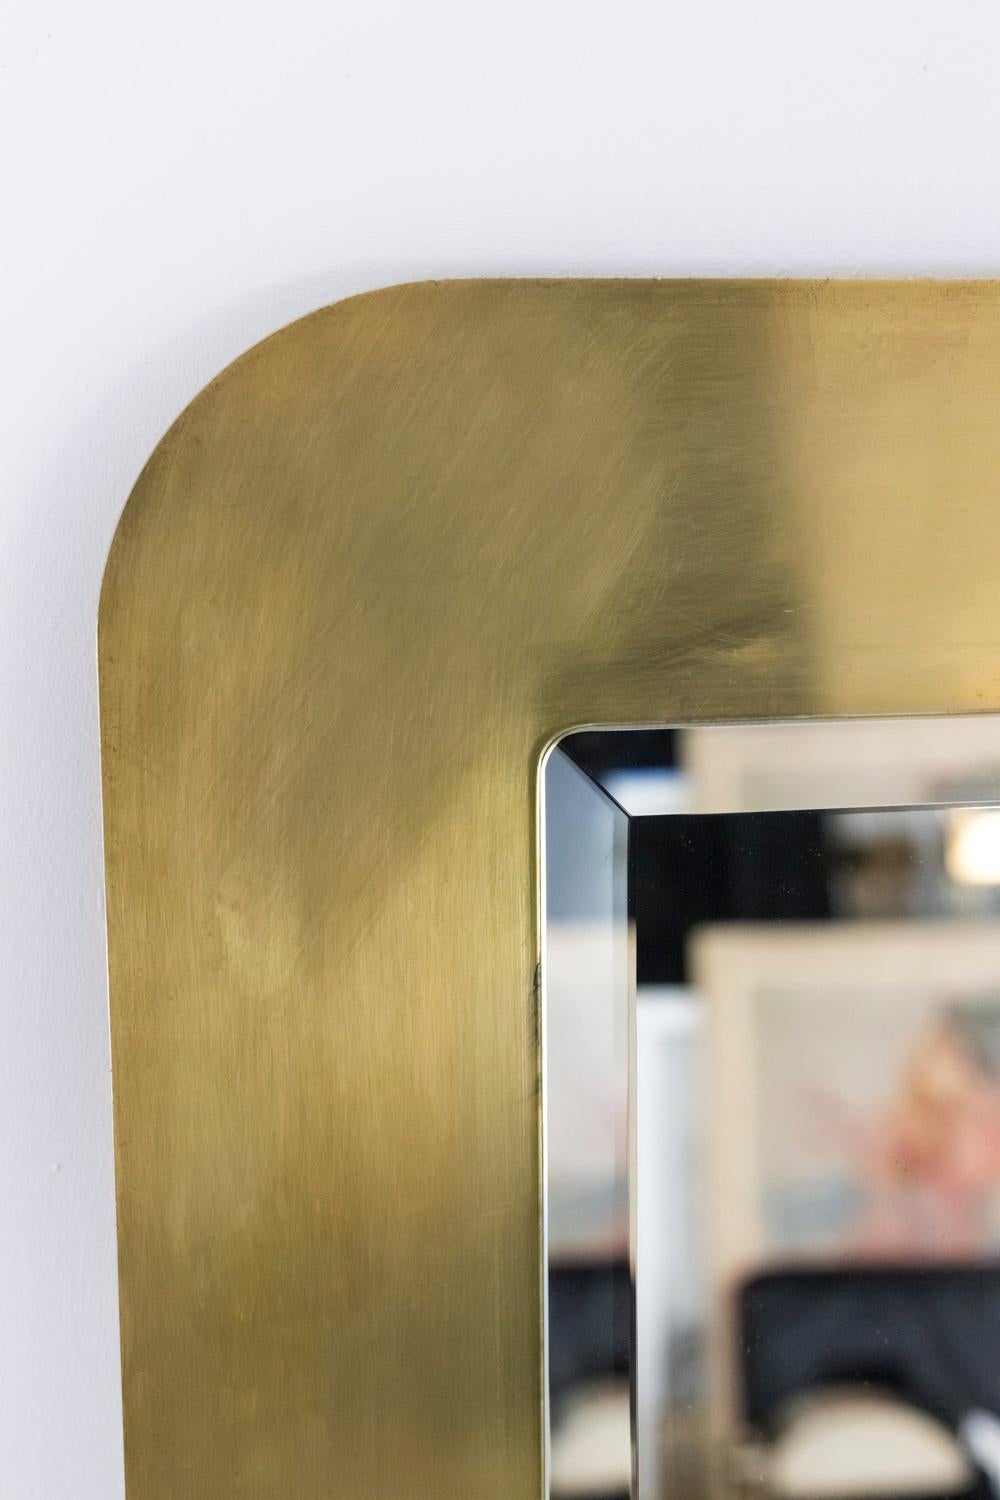 Beveled gilt brass brushed mirror in a rectangular shape with curved corners.

Italian work realized in the 1970s.